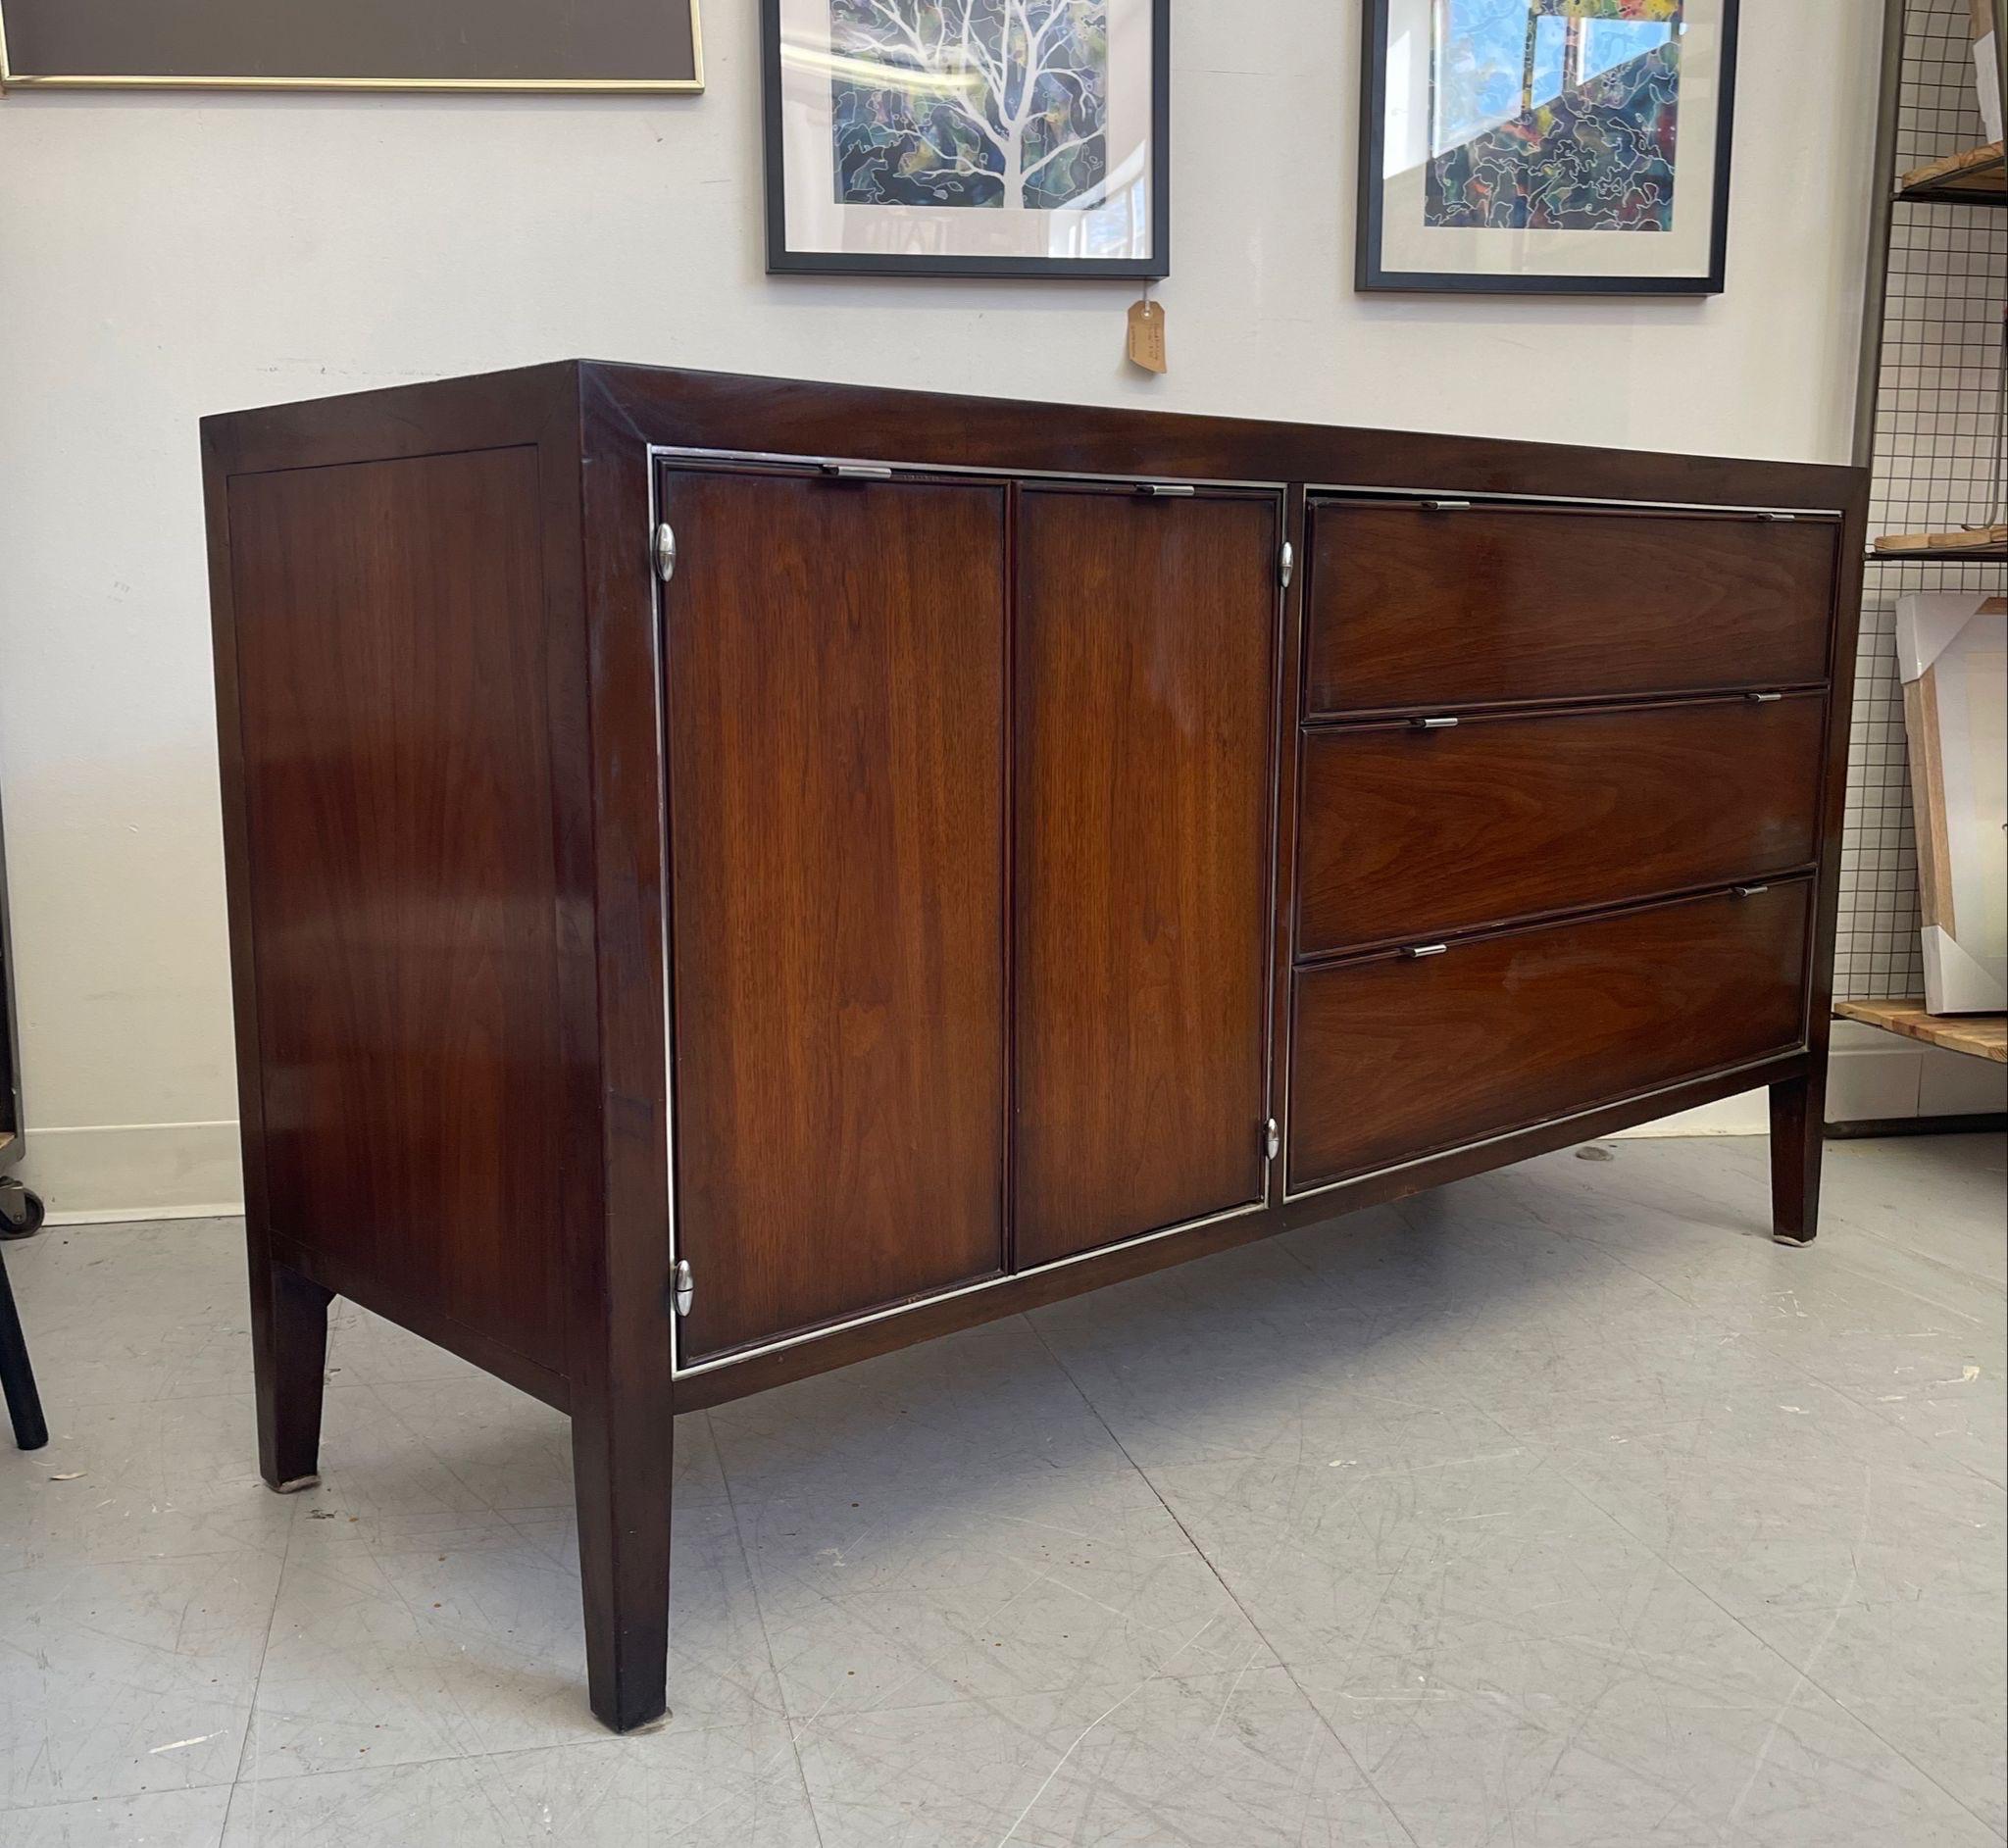 Walnut Toned Credenza with 6 dovetailed drawers. 3 Drawers are behind hinge doors.Makers mark inside drawer. Chrome toned handles. Vintage Condition Consistent with Age as Pictured.

Dimensions. 56 W ; 19 D ; 30 H